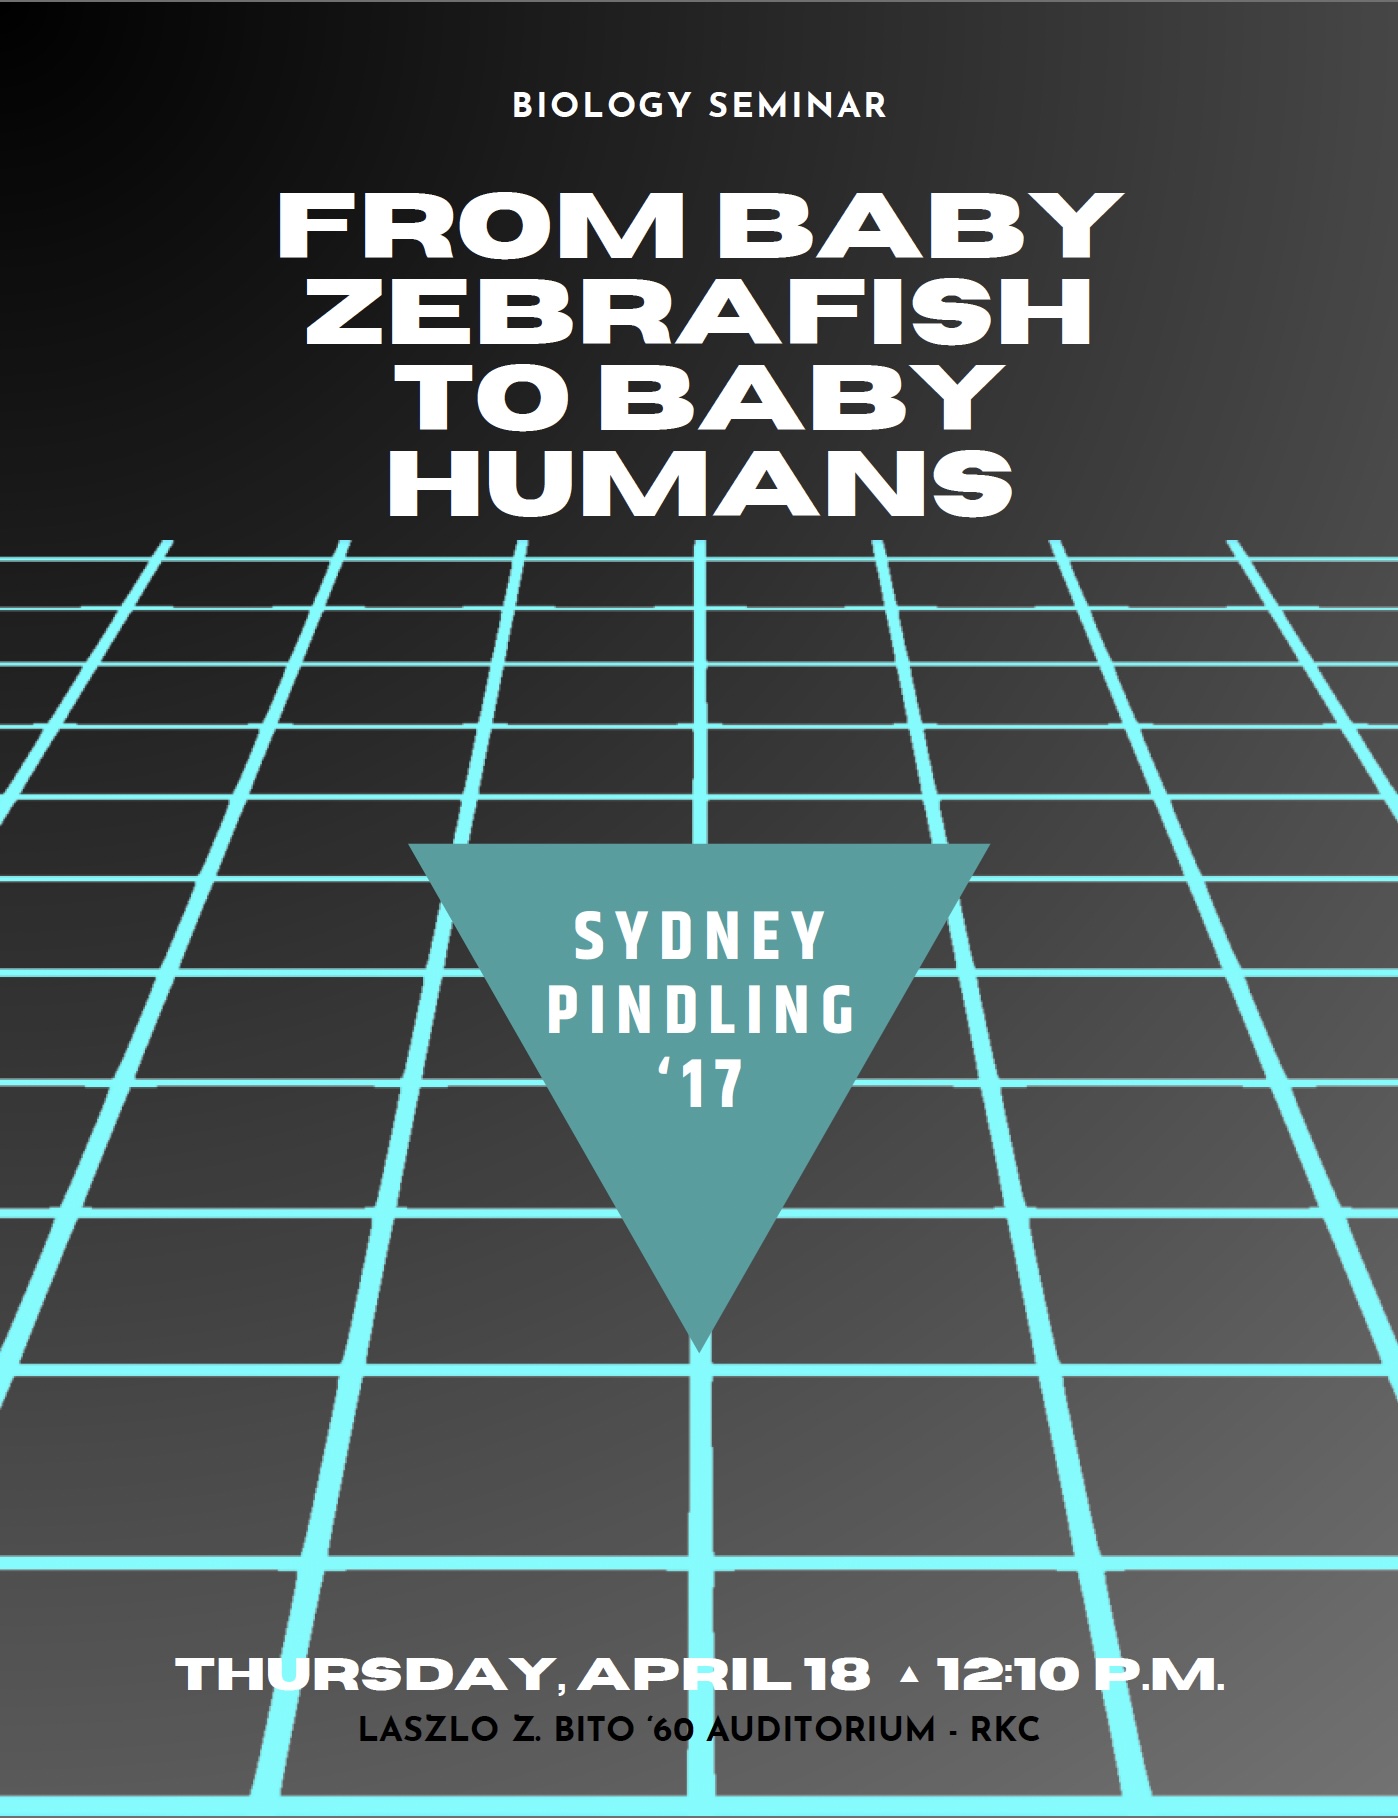 From Baby Zebrafish to Baby Humans